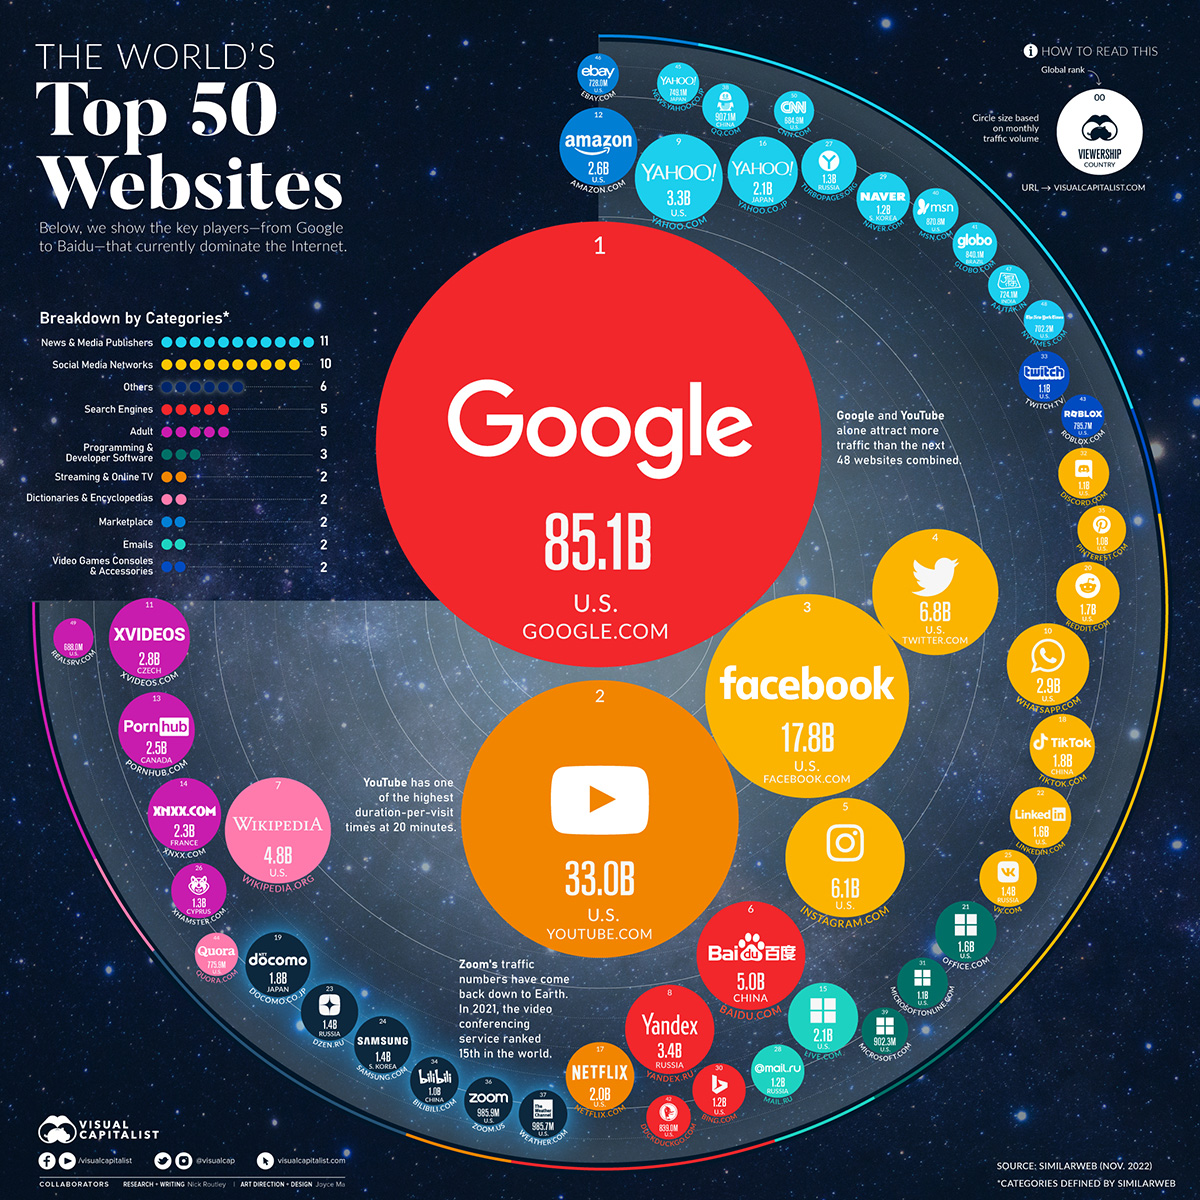 Data visualization showing the top 50 websites in the world